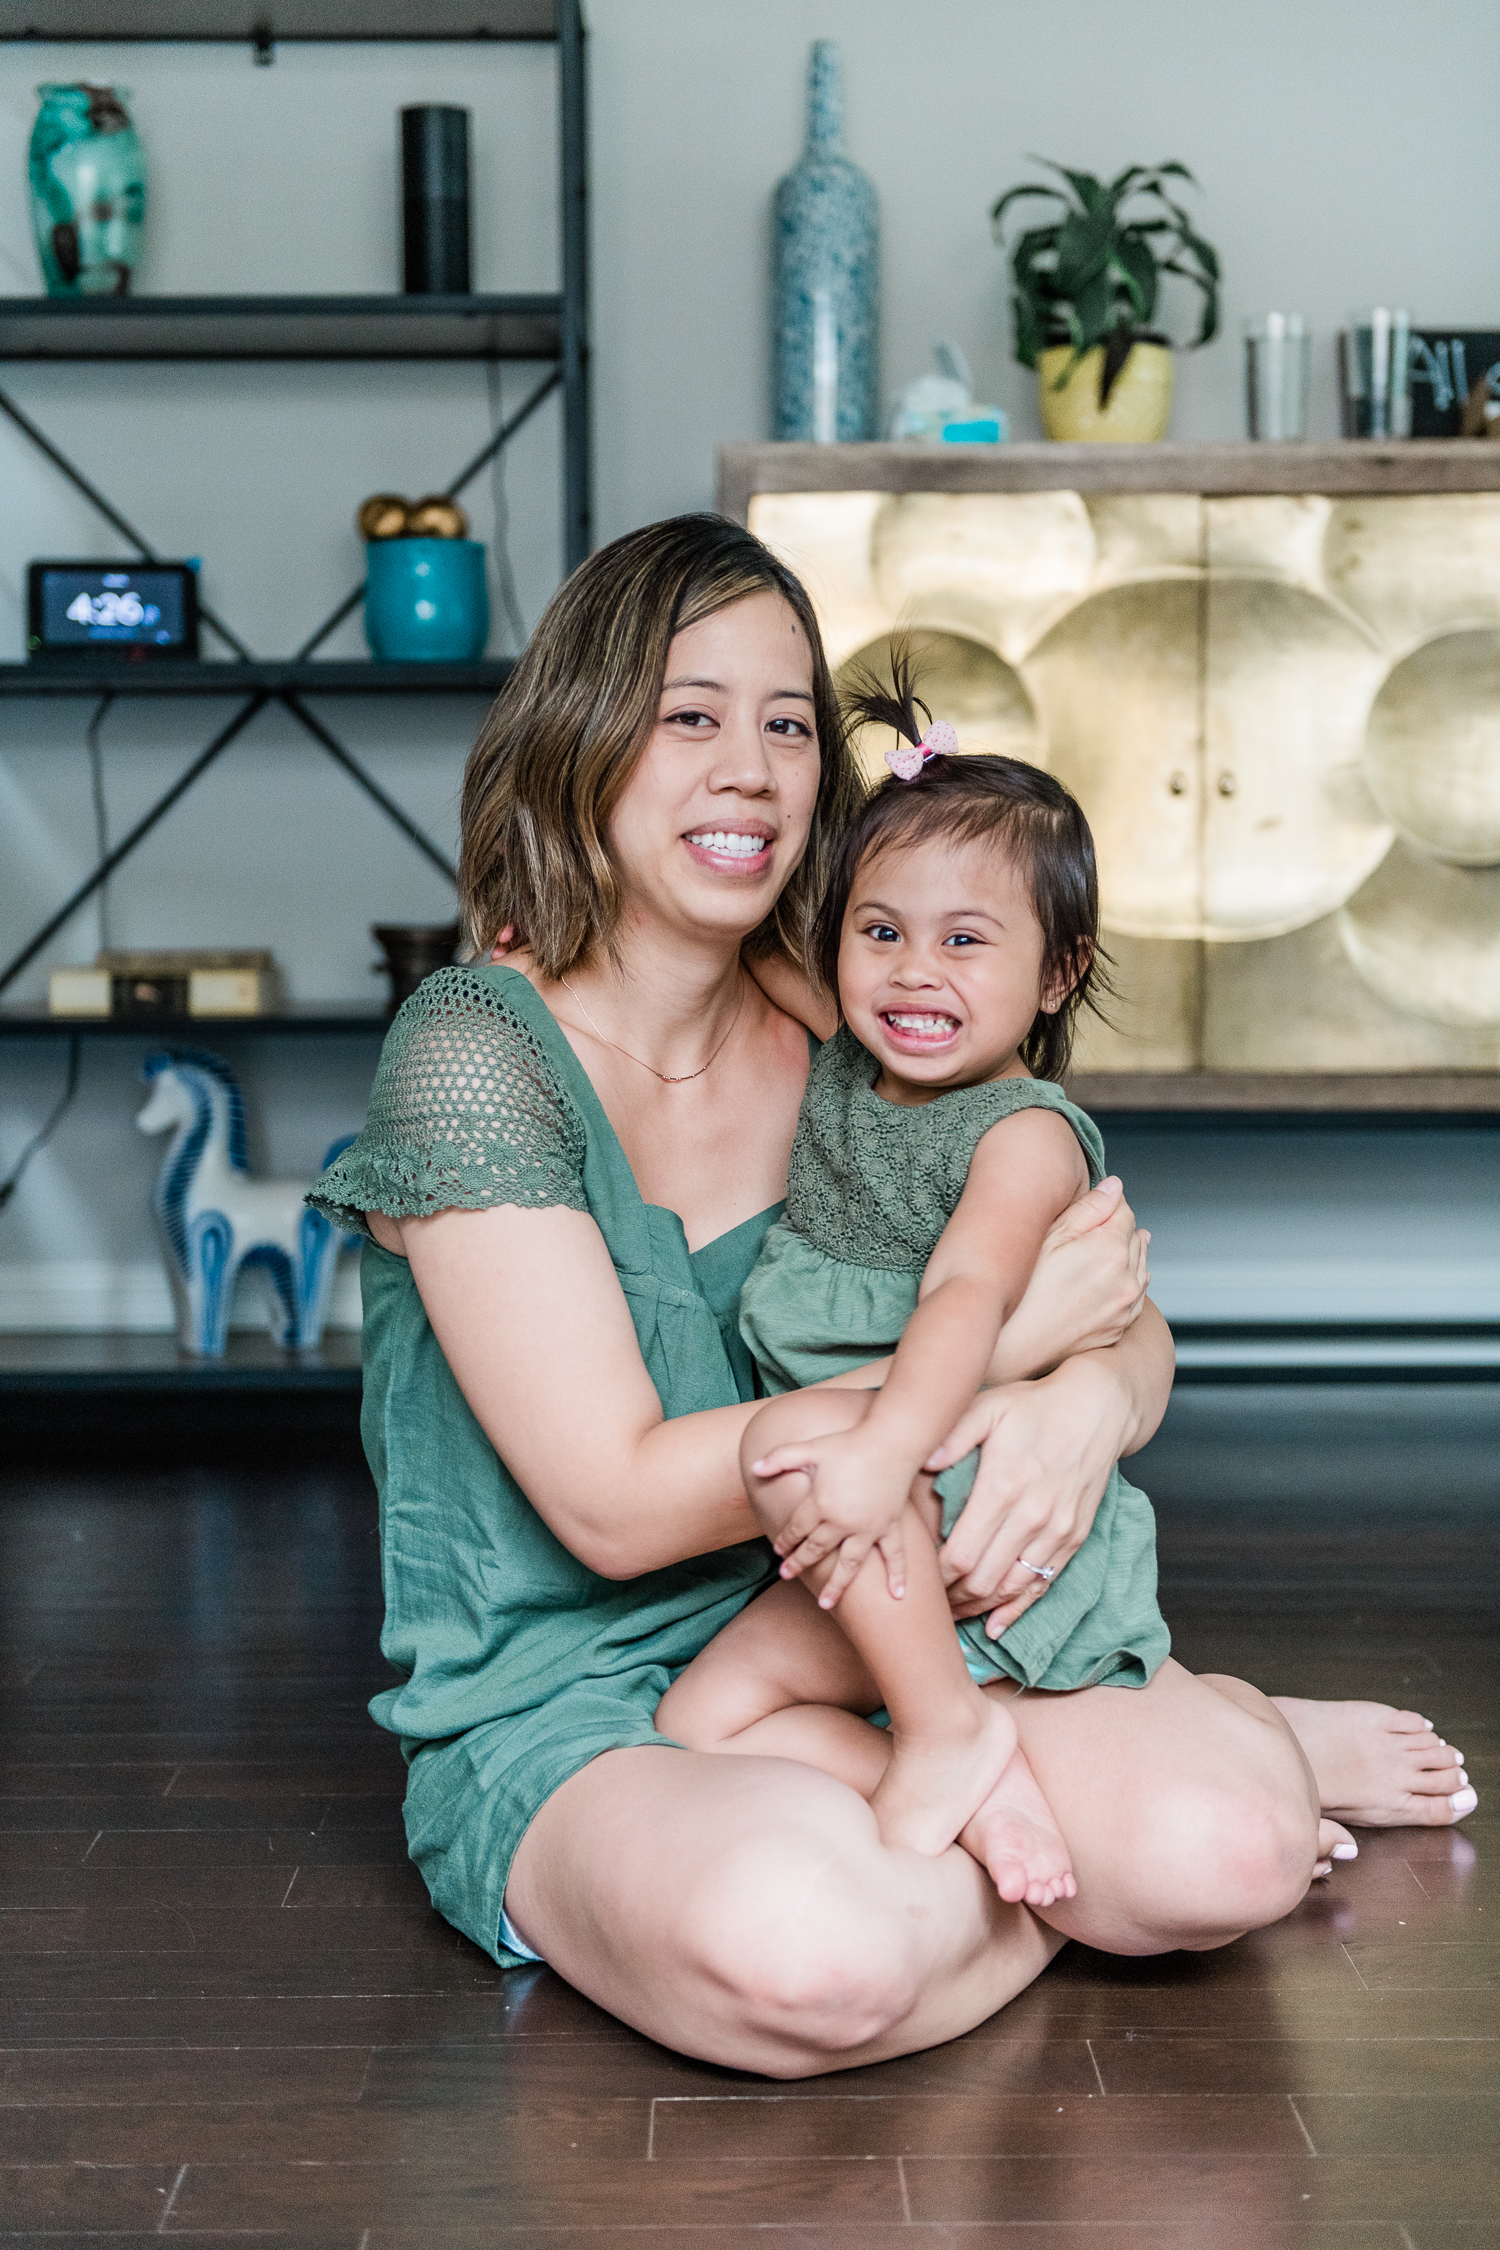 Mother and toddler in green dresses smiling while sitting together on living room floor